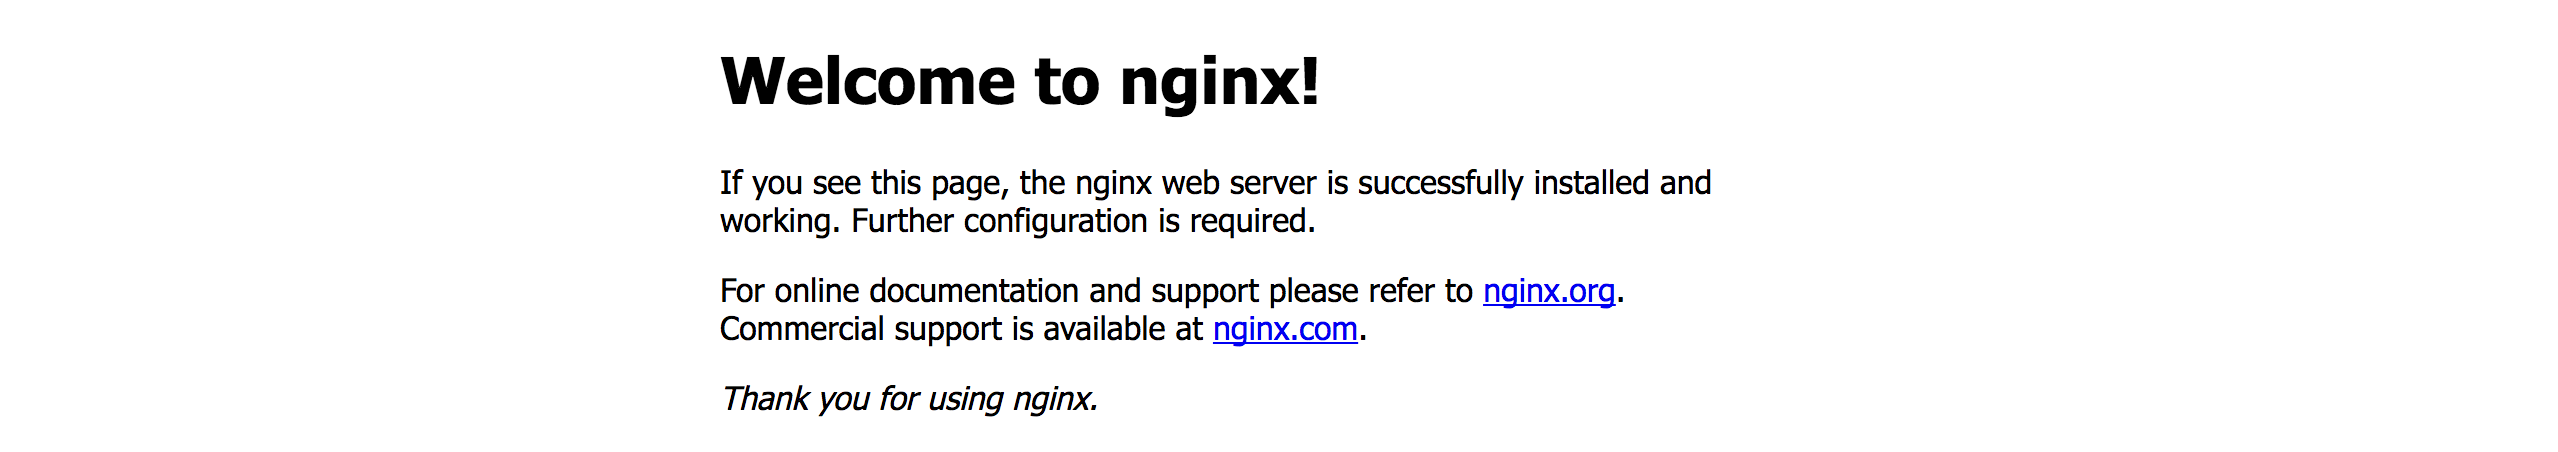 Welcome_to_nginx_.png